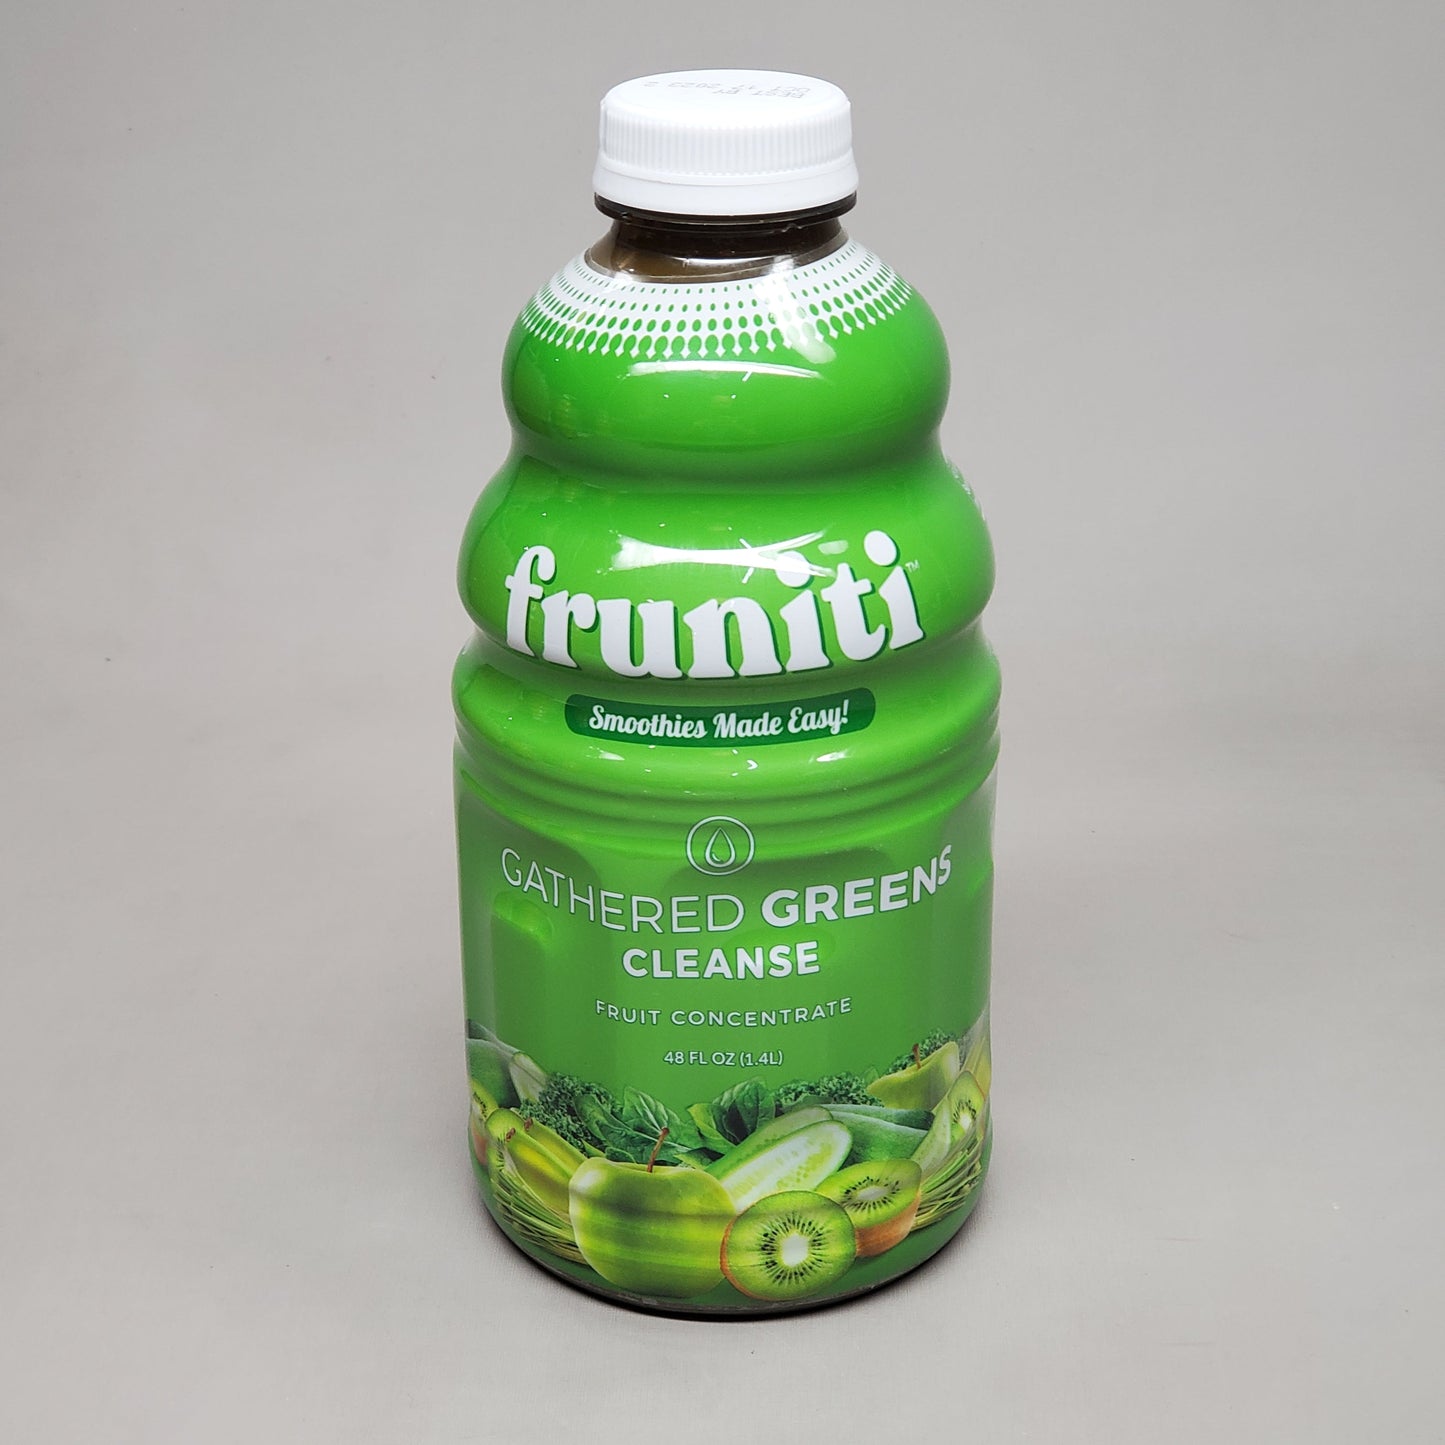 ZA@ FRUNITI 6-PACK! Gathered Greens Cleans Fruit Smoothie Mix 48 fl oz BB 10/23 (AS-IS)